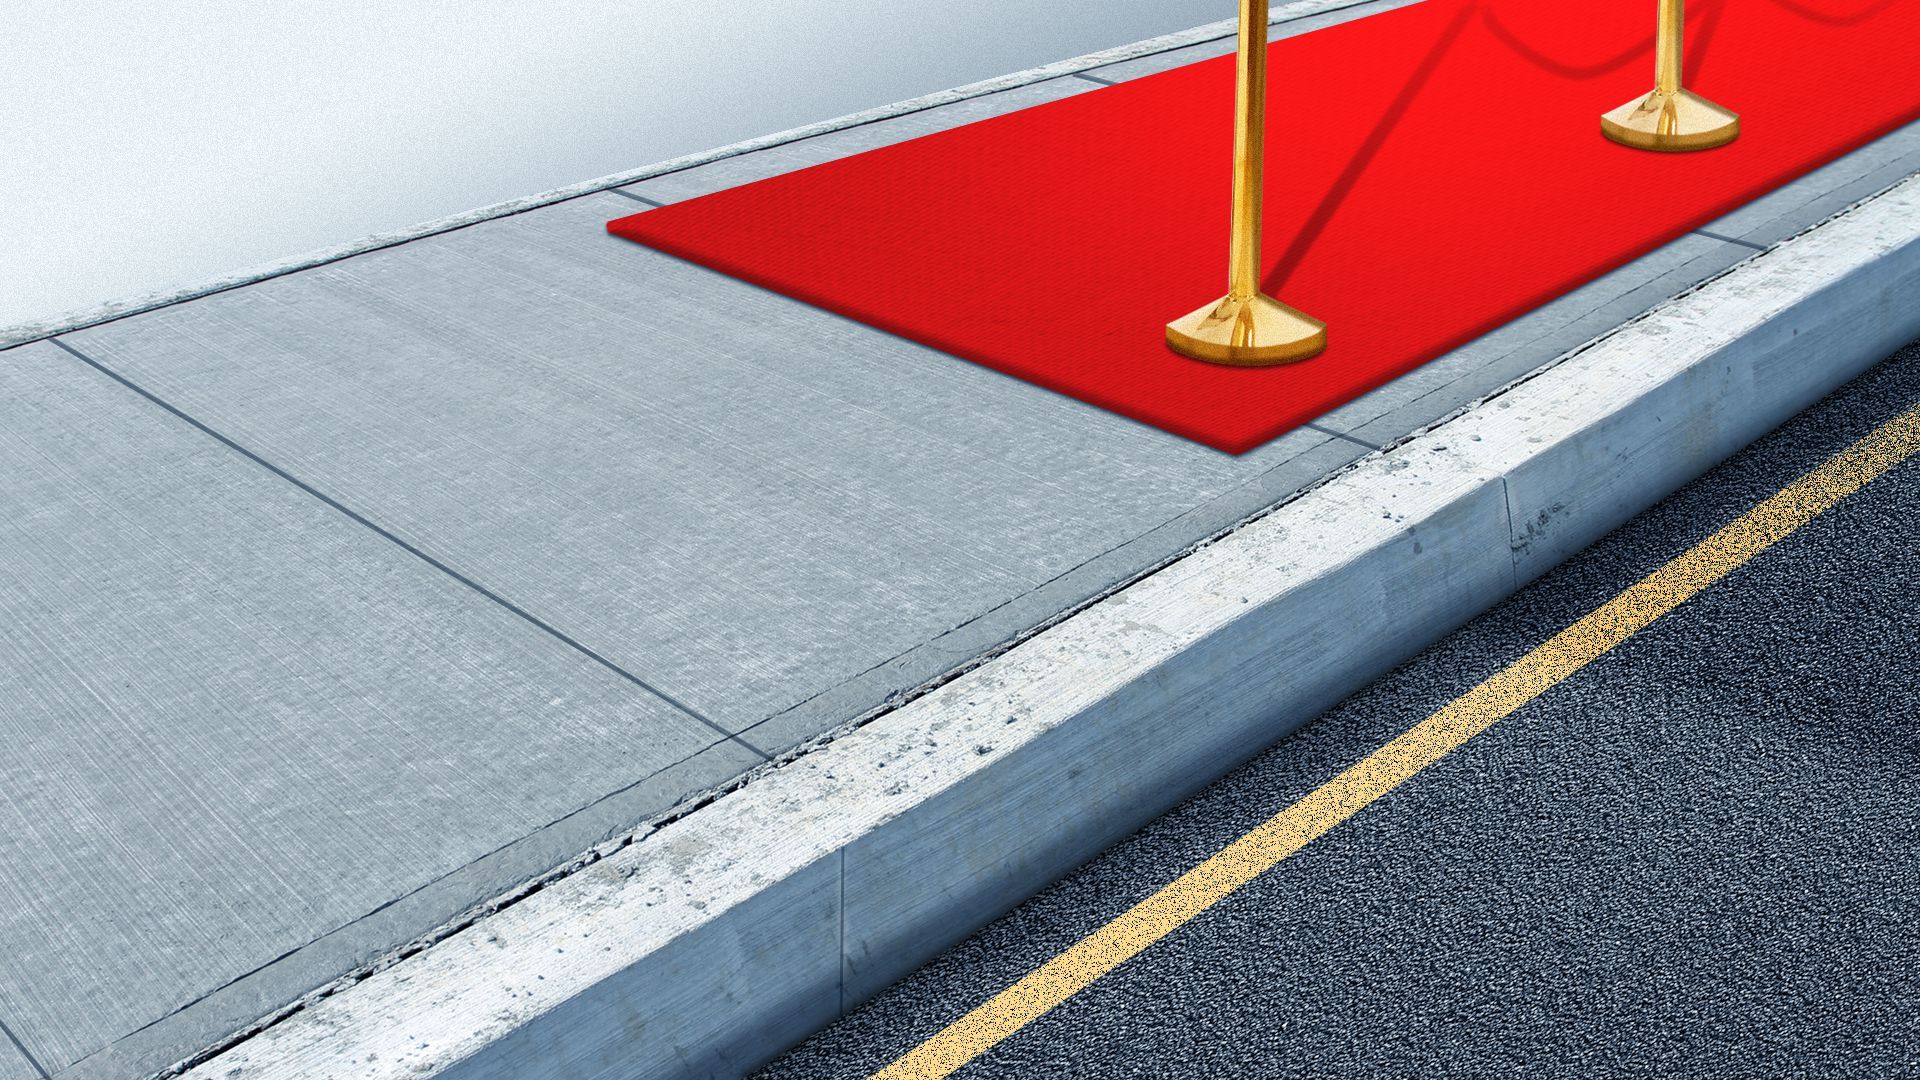 Illustration of a sidewalk and curb with a red carpet and velvet rope